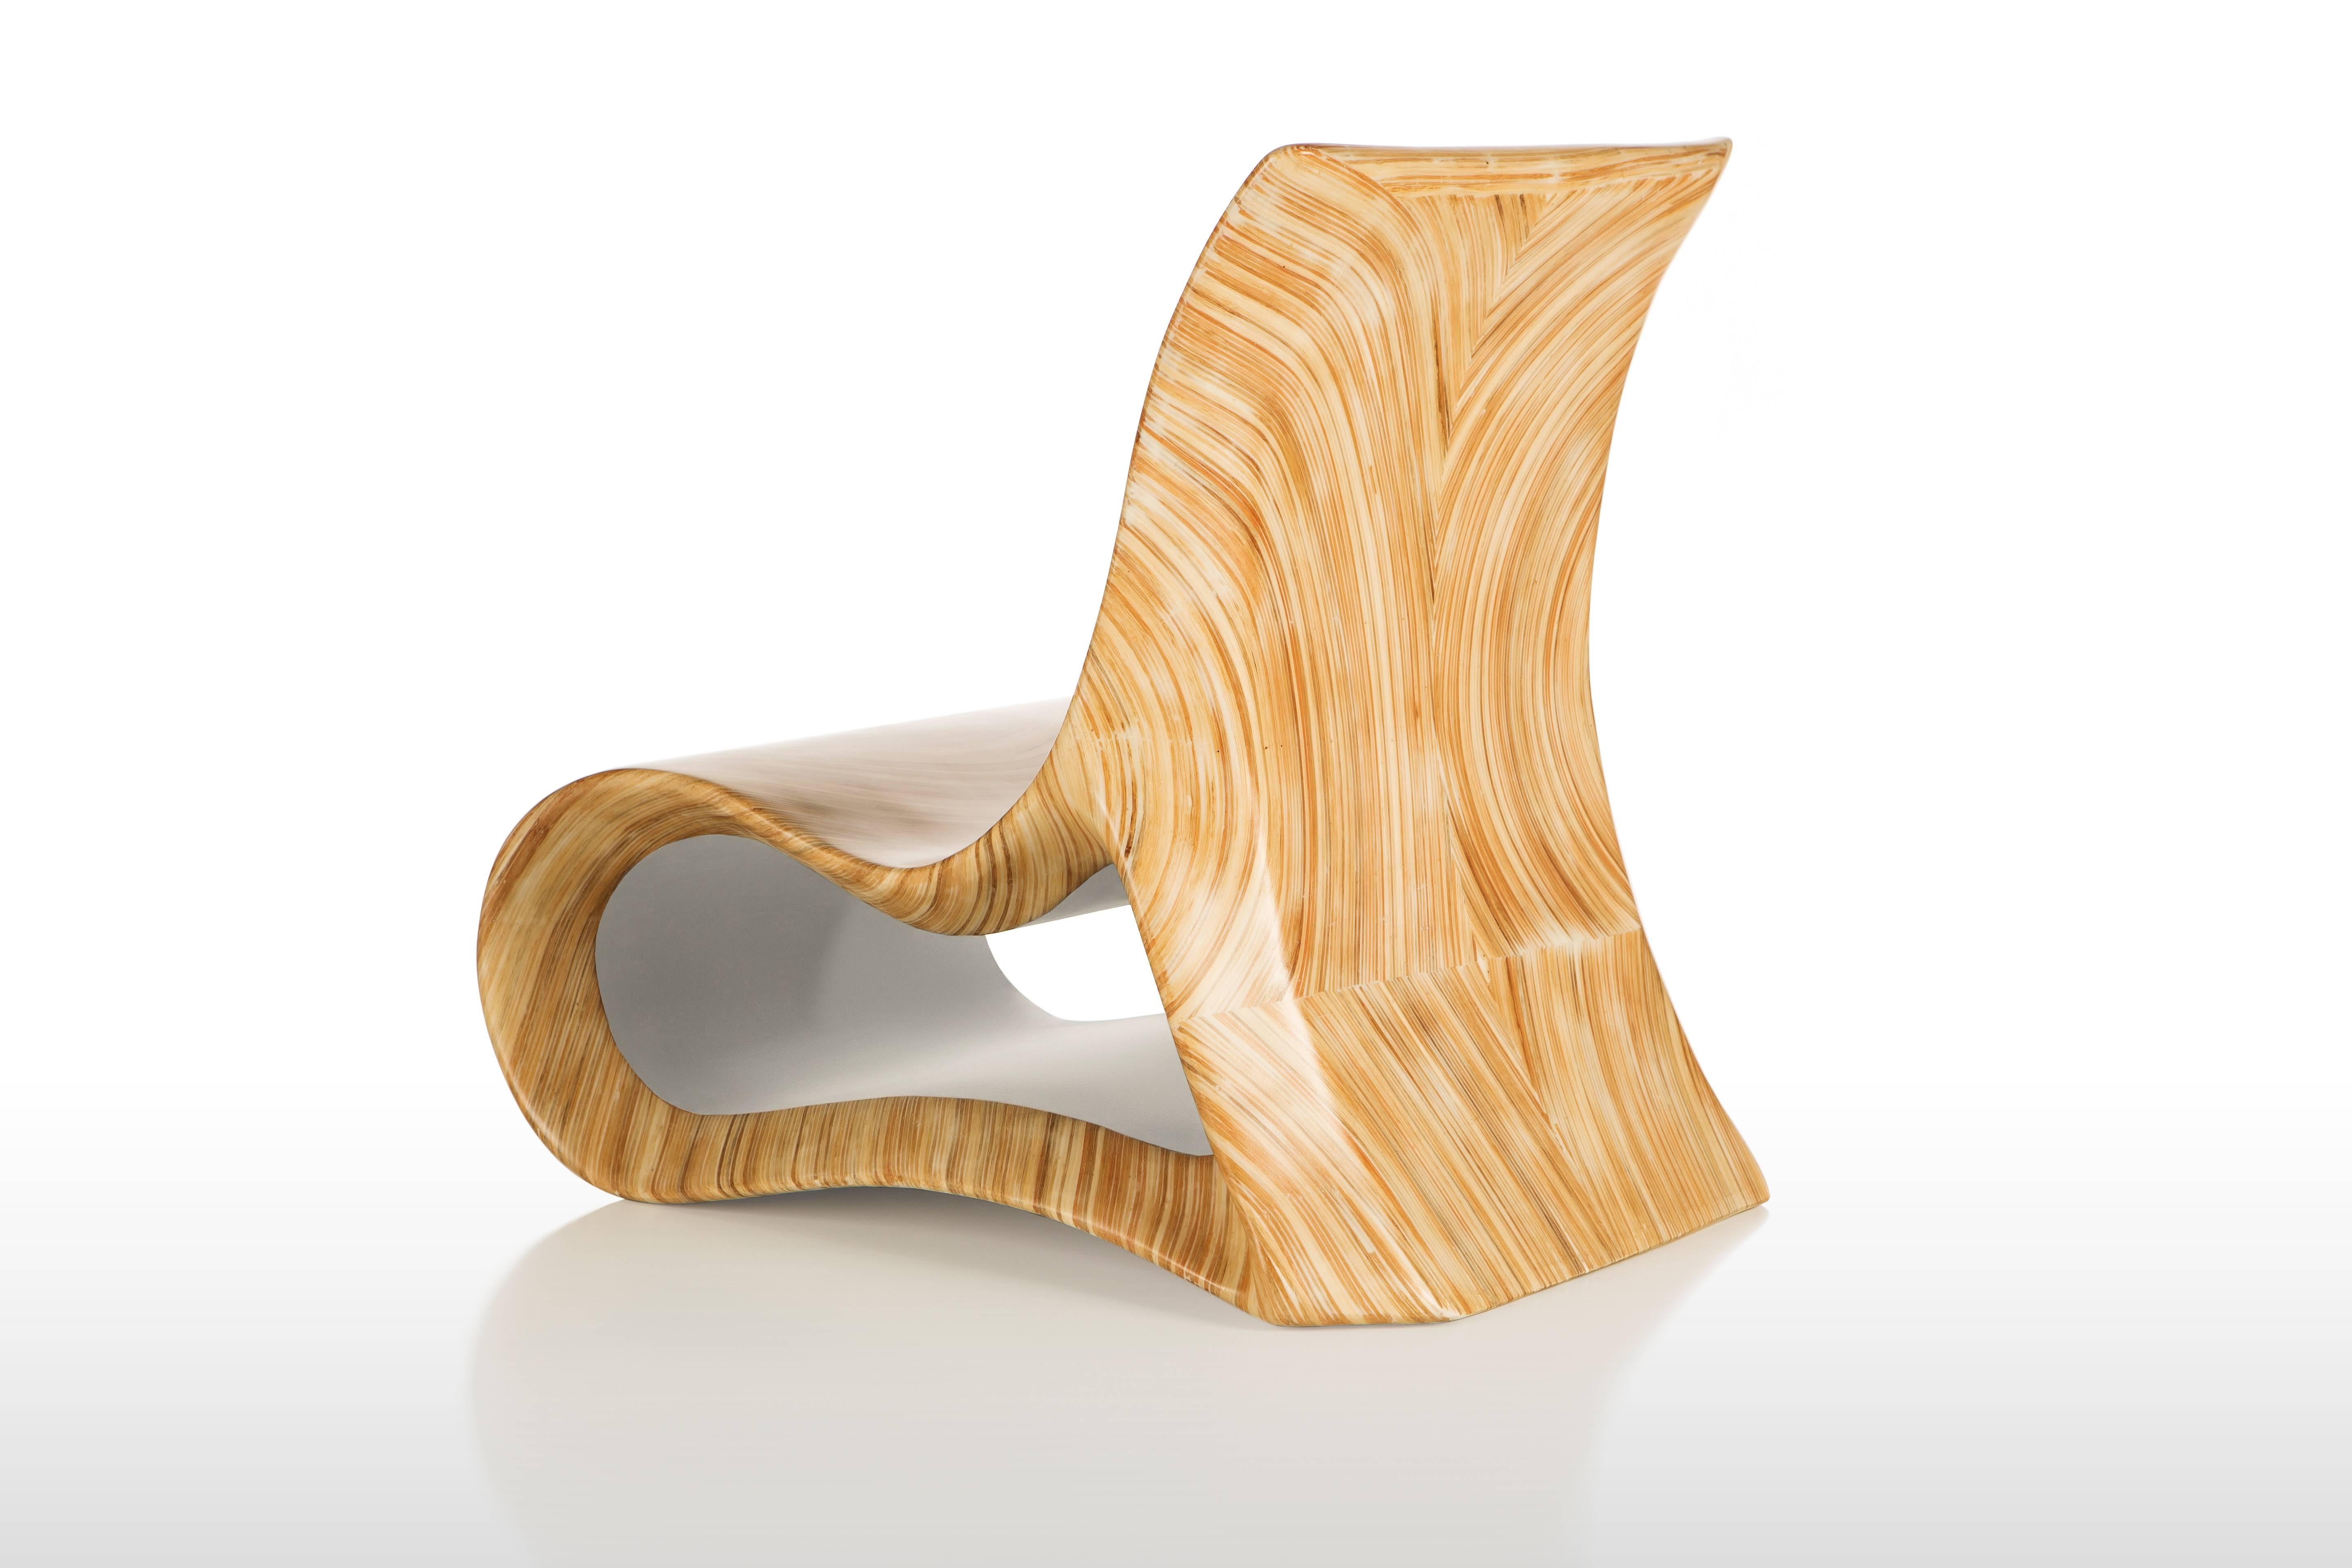 The Altoum single seater is a mesmerizing piece of furniture, with its meandering curves and seemingly endless tree rings. The shape of this seat takes inspiration from Op Art whilst the sophisticated wood inlay finish breathes life into it.